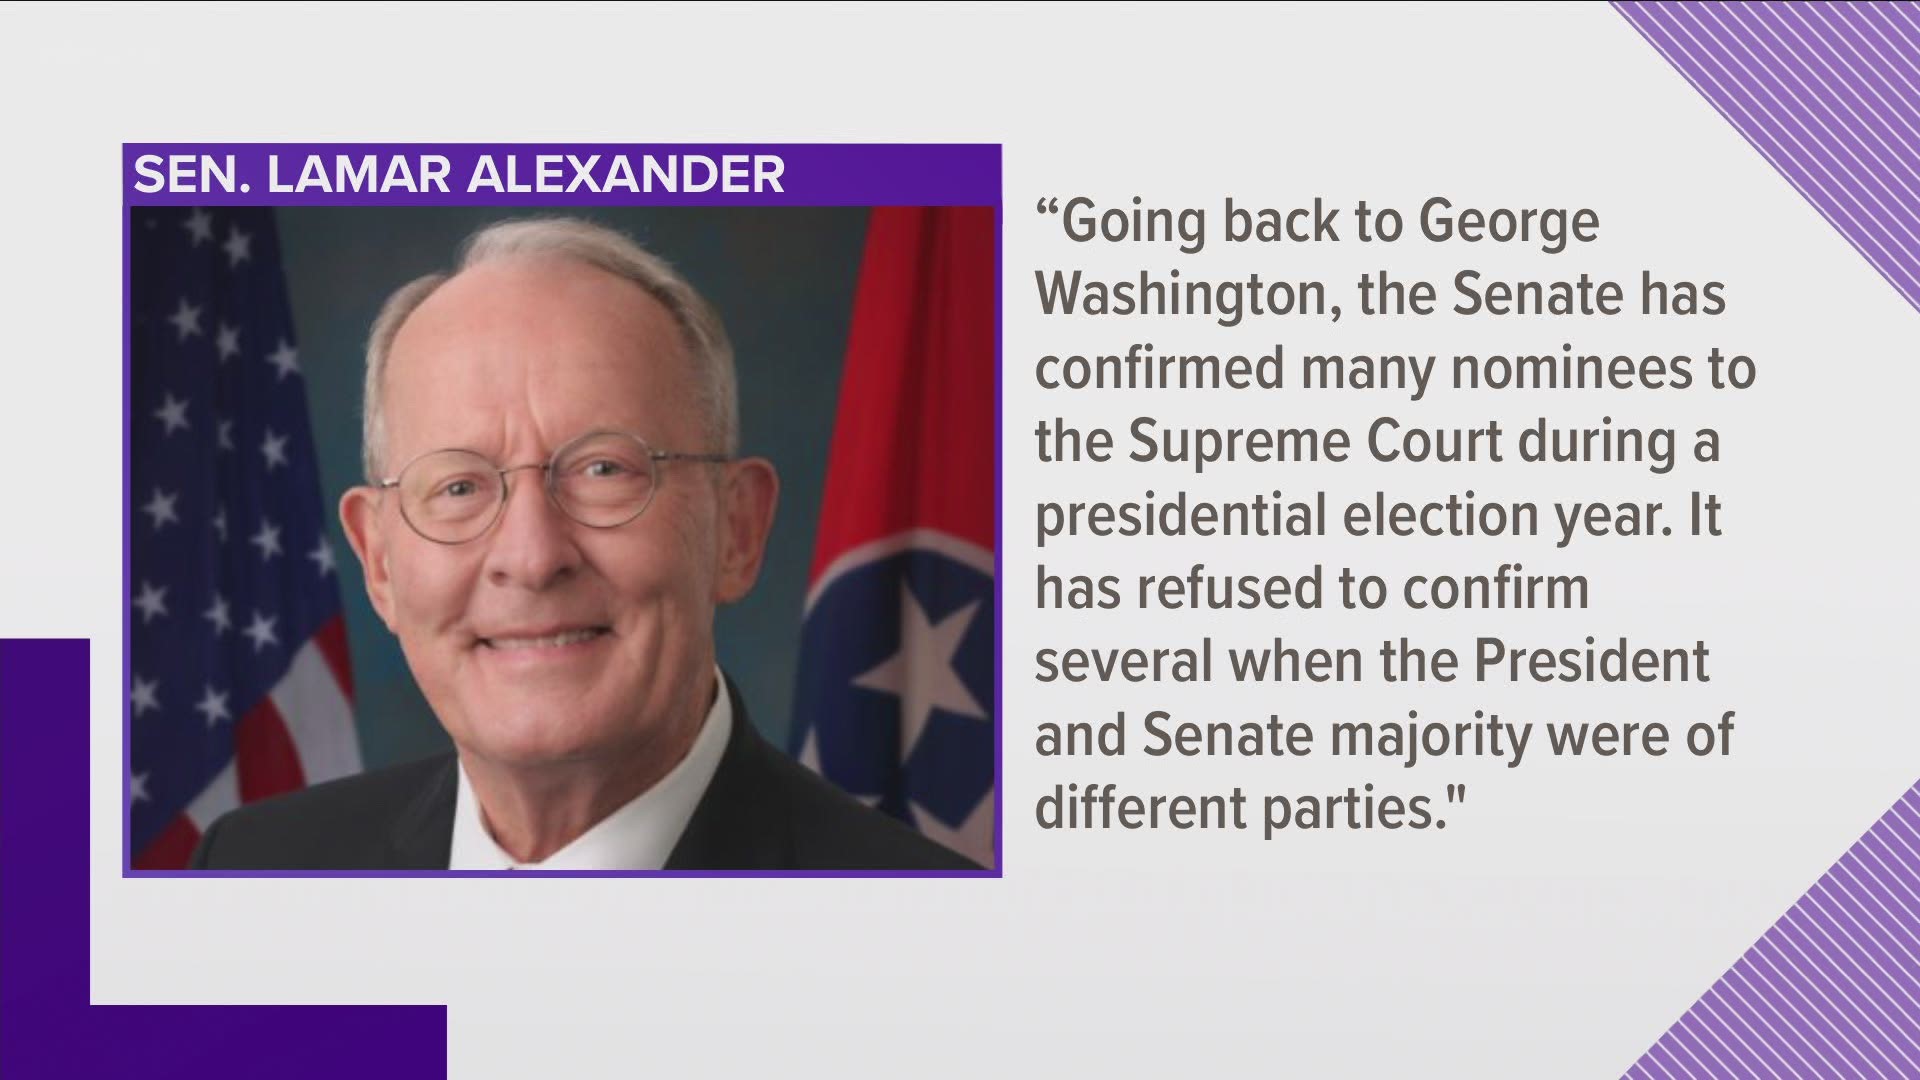 Senator Lamar Alexander says he will consider President Trump's nomination to fill the vacant supreme court seat after the death of Justice Ruth Bader Ginsburg.